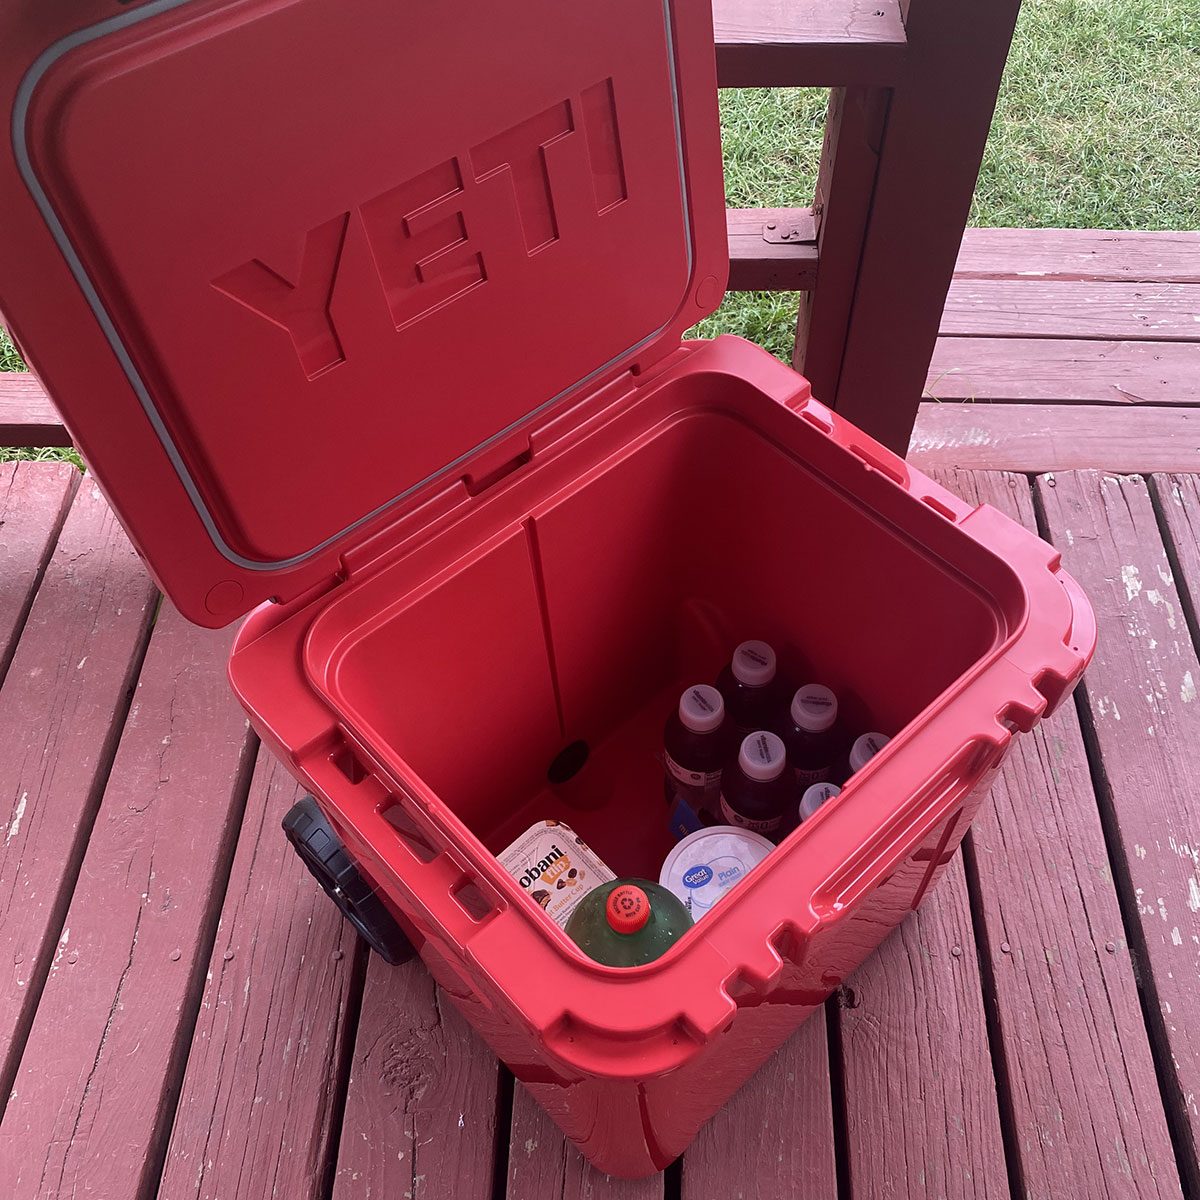 Opened Portable Cooler with Drinks inside